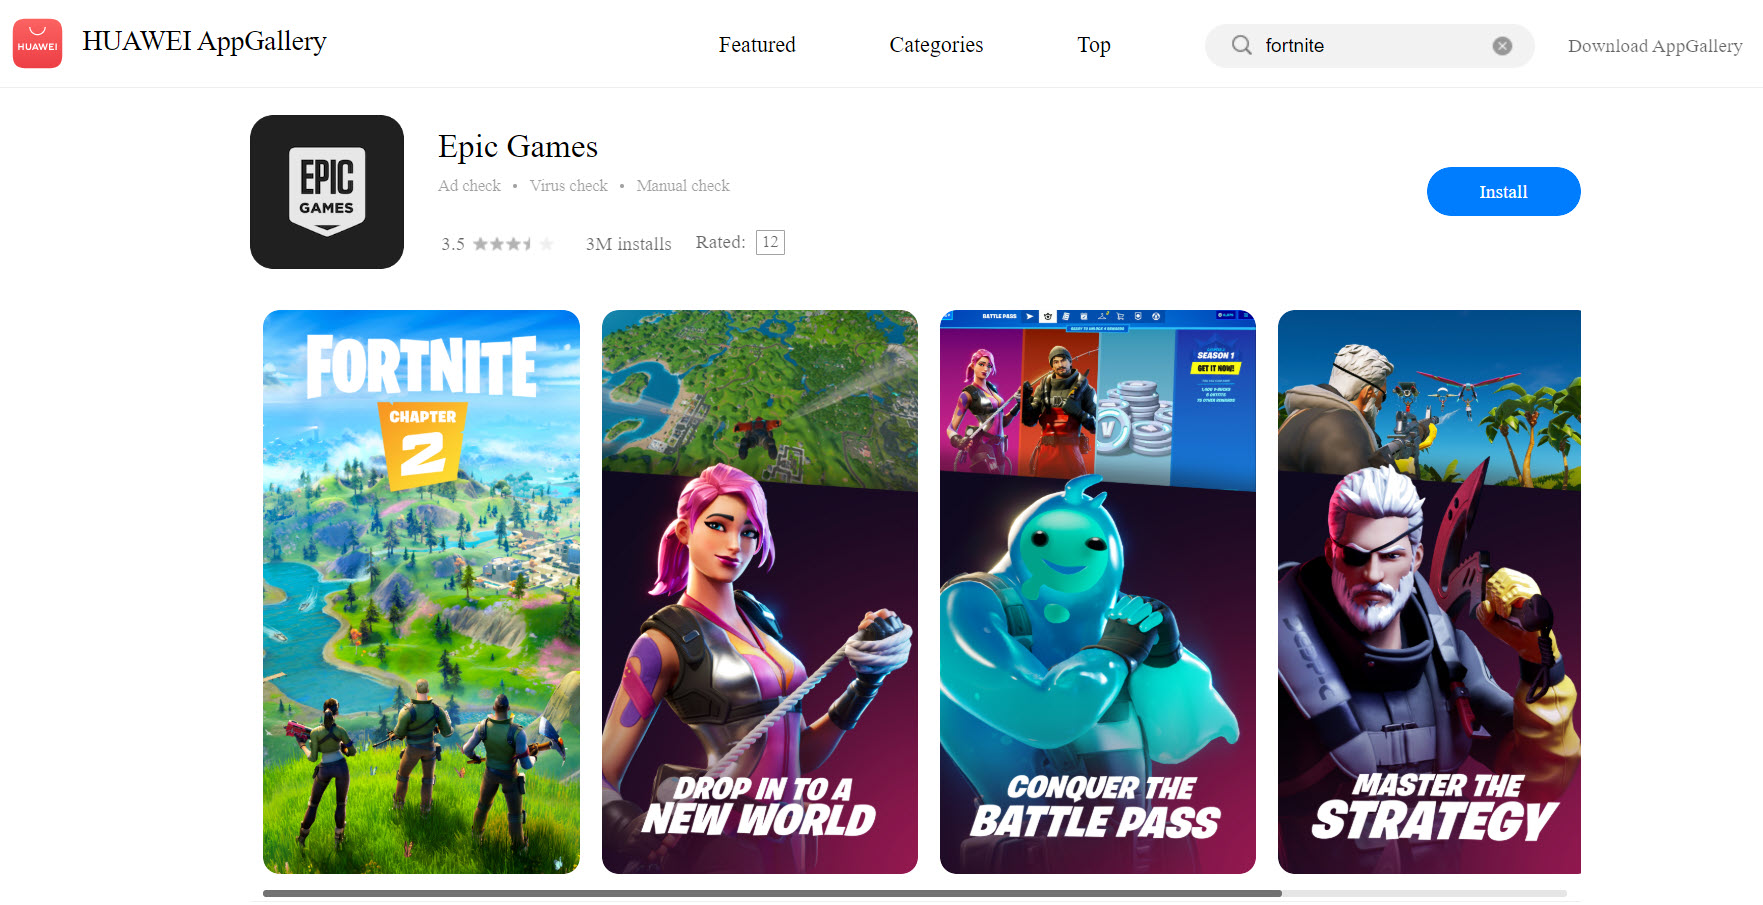 Download Fortnite on Huawei Mate 9 Pro